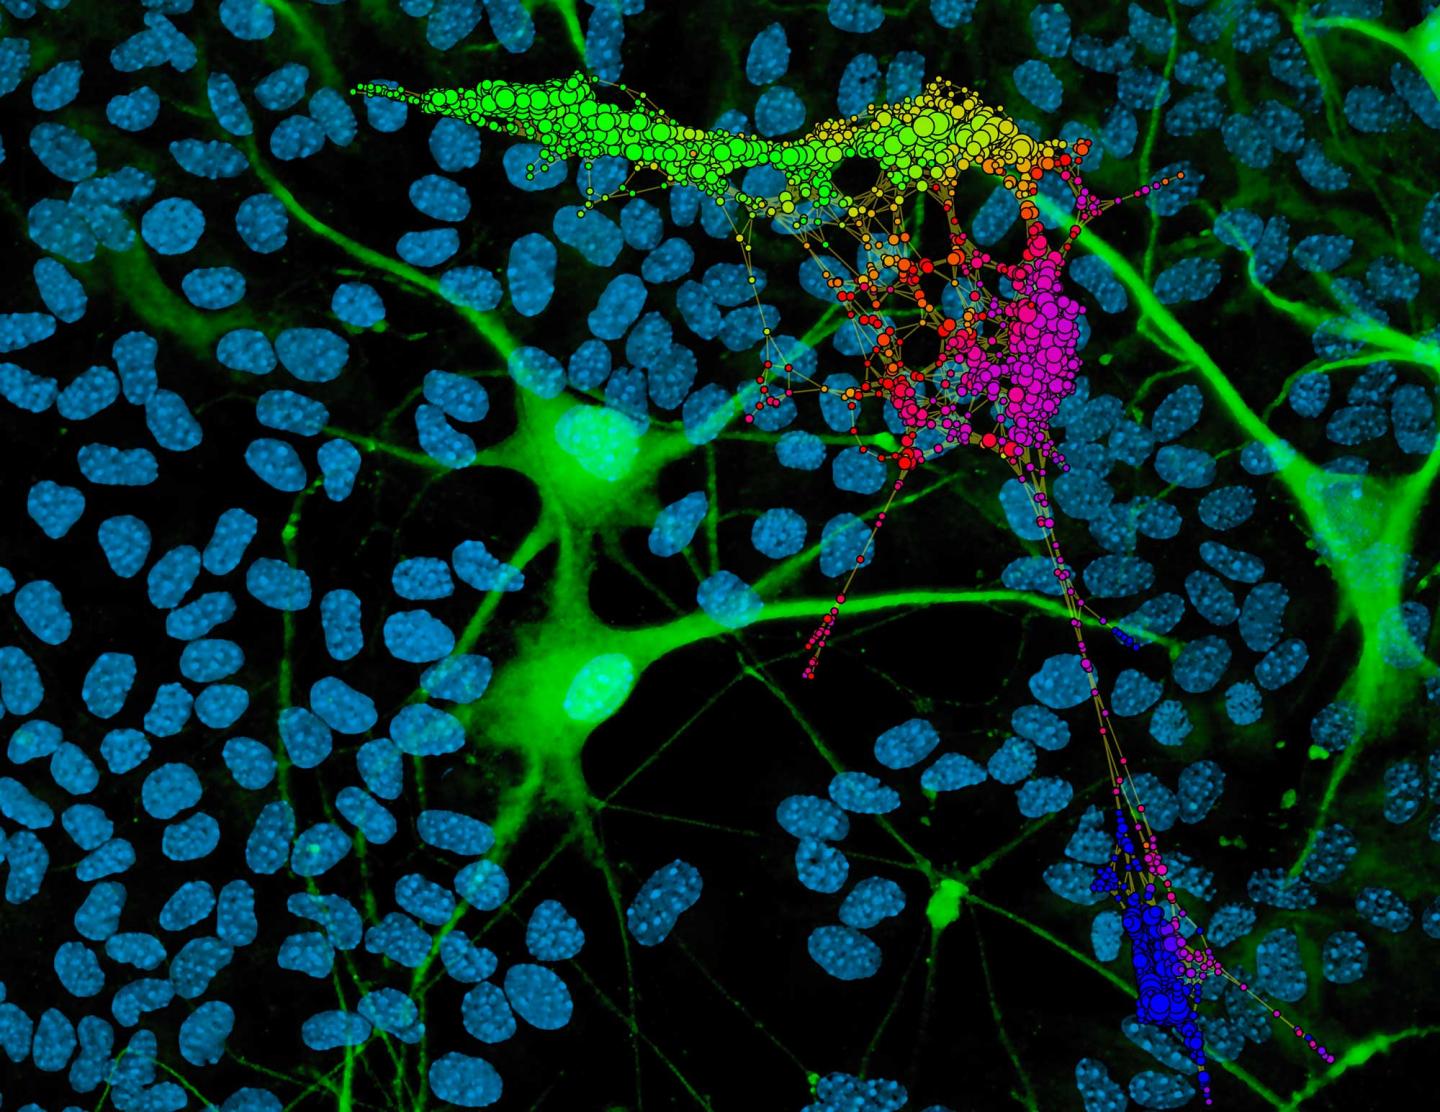 Topological Map of Embryonic Stem Cells Transitioning into Motor Neurons